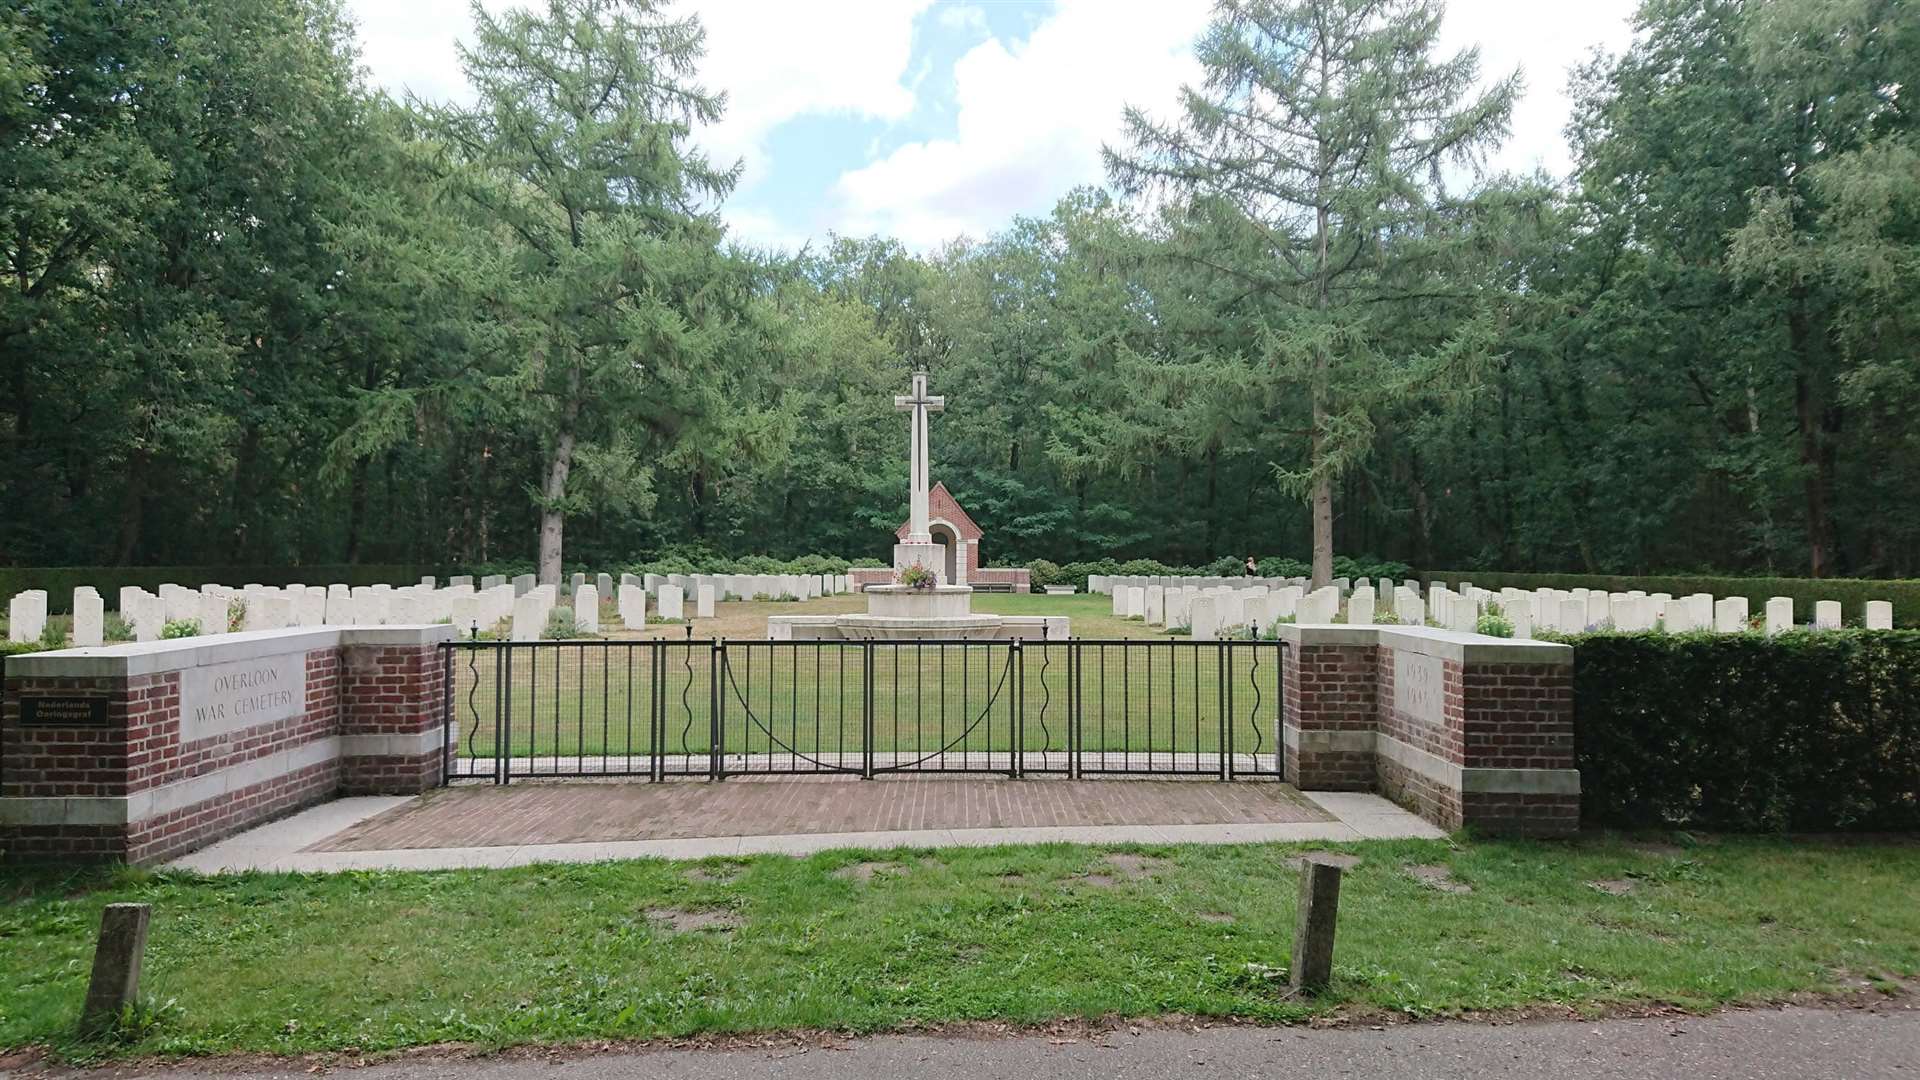 The Overloon War Cemetery in Holland